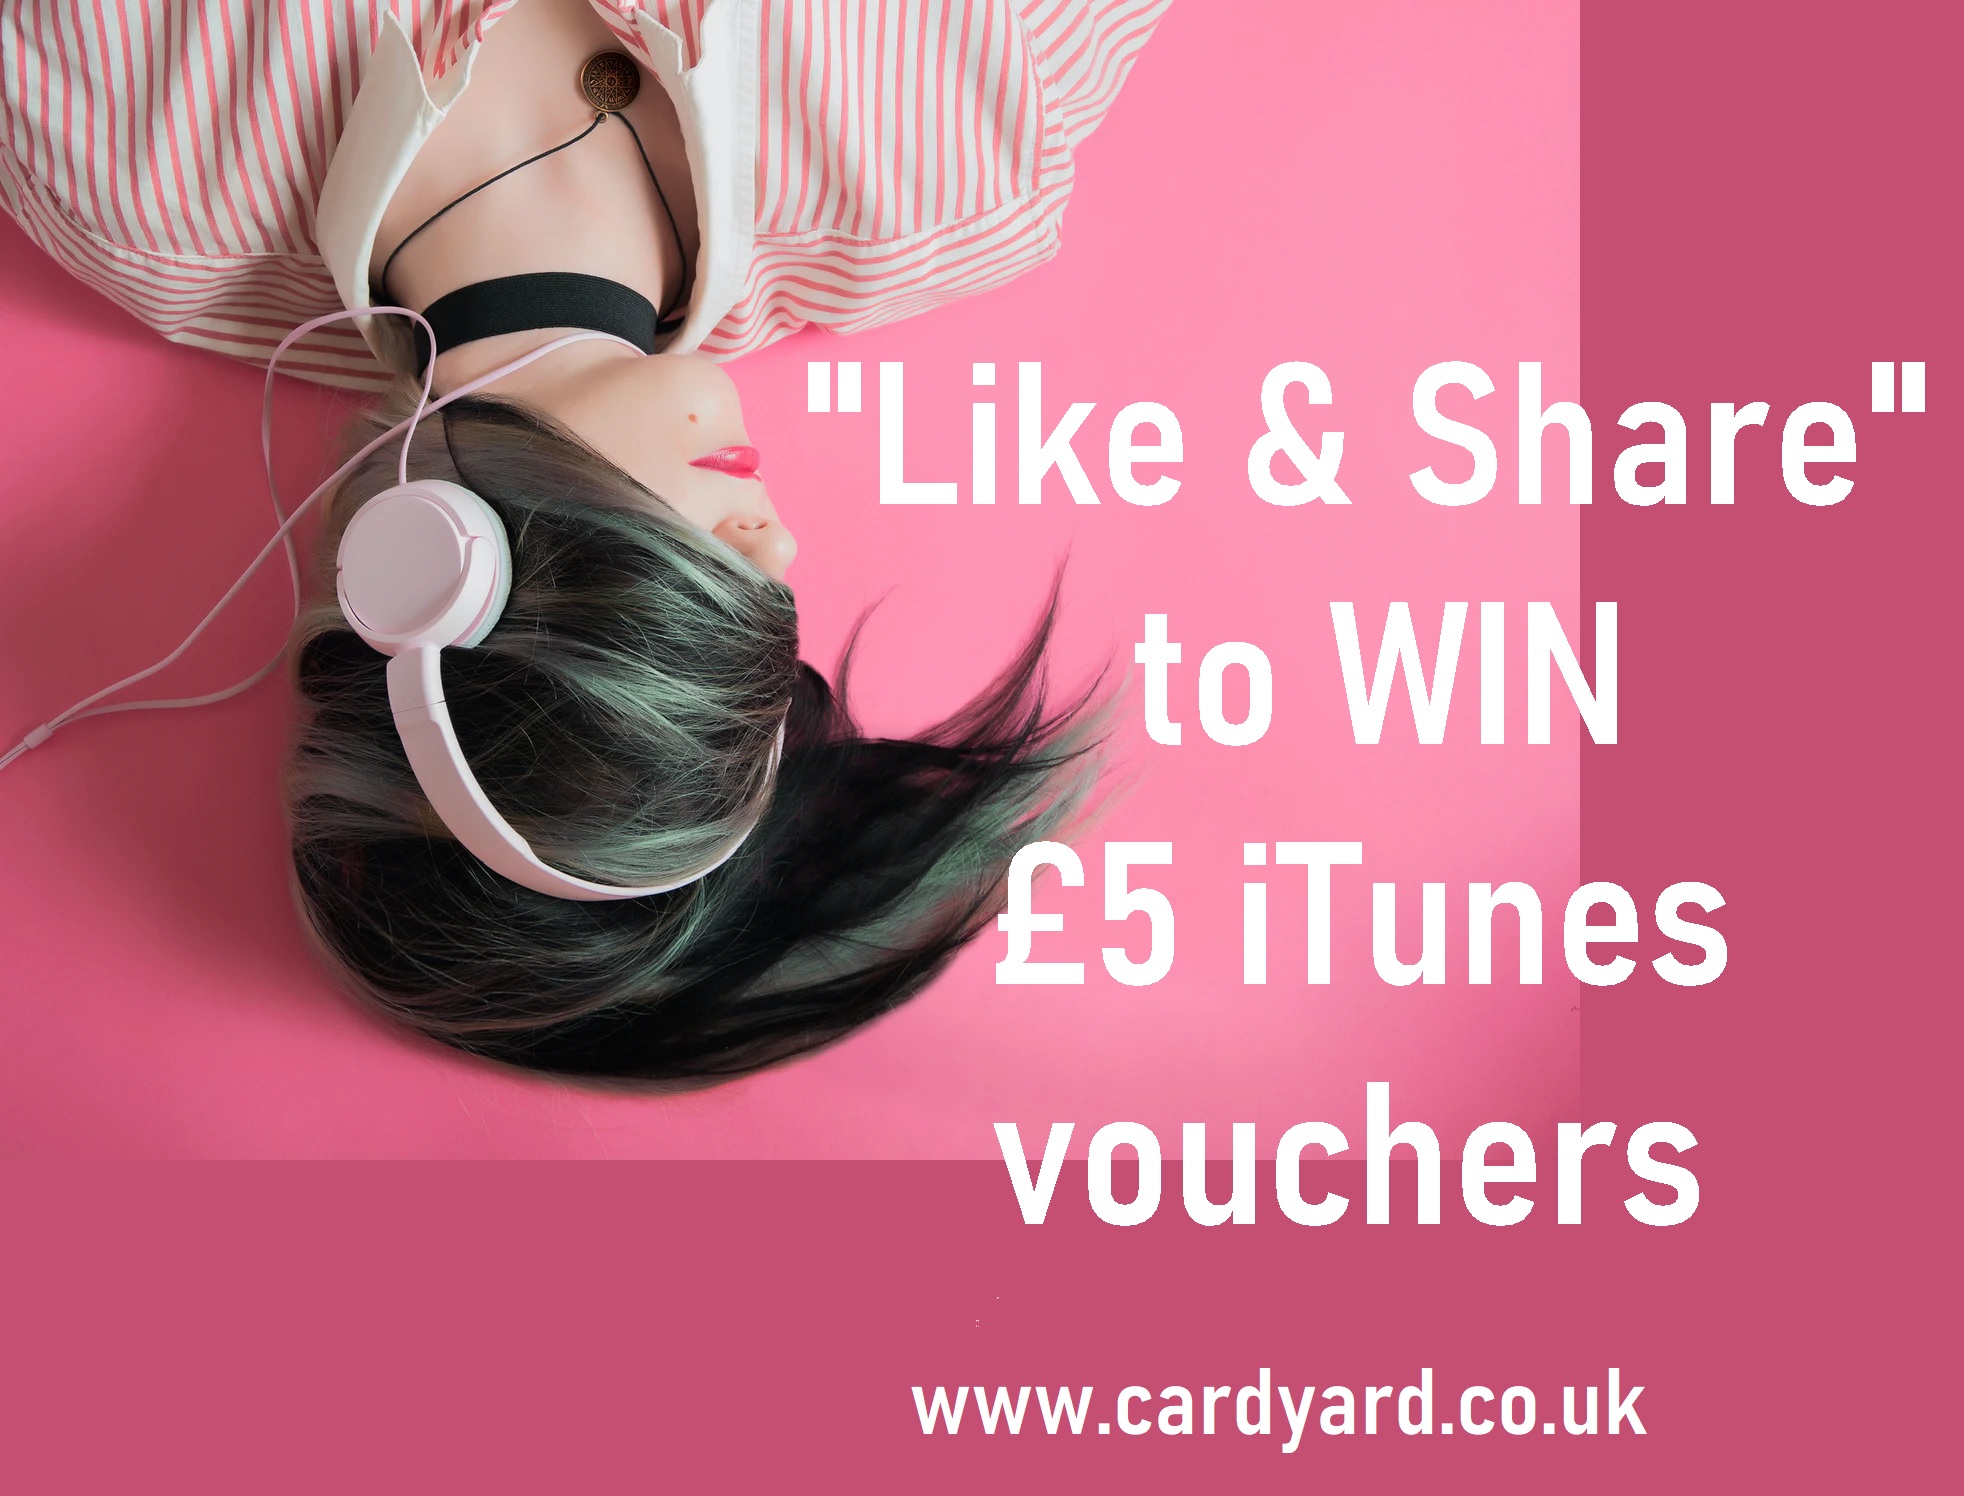 May Day Competition - WIN your next sounds with free iTunes vouchers (GiftCard Competition) #Cardyard